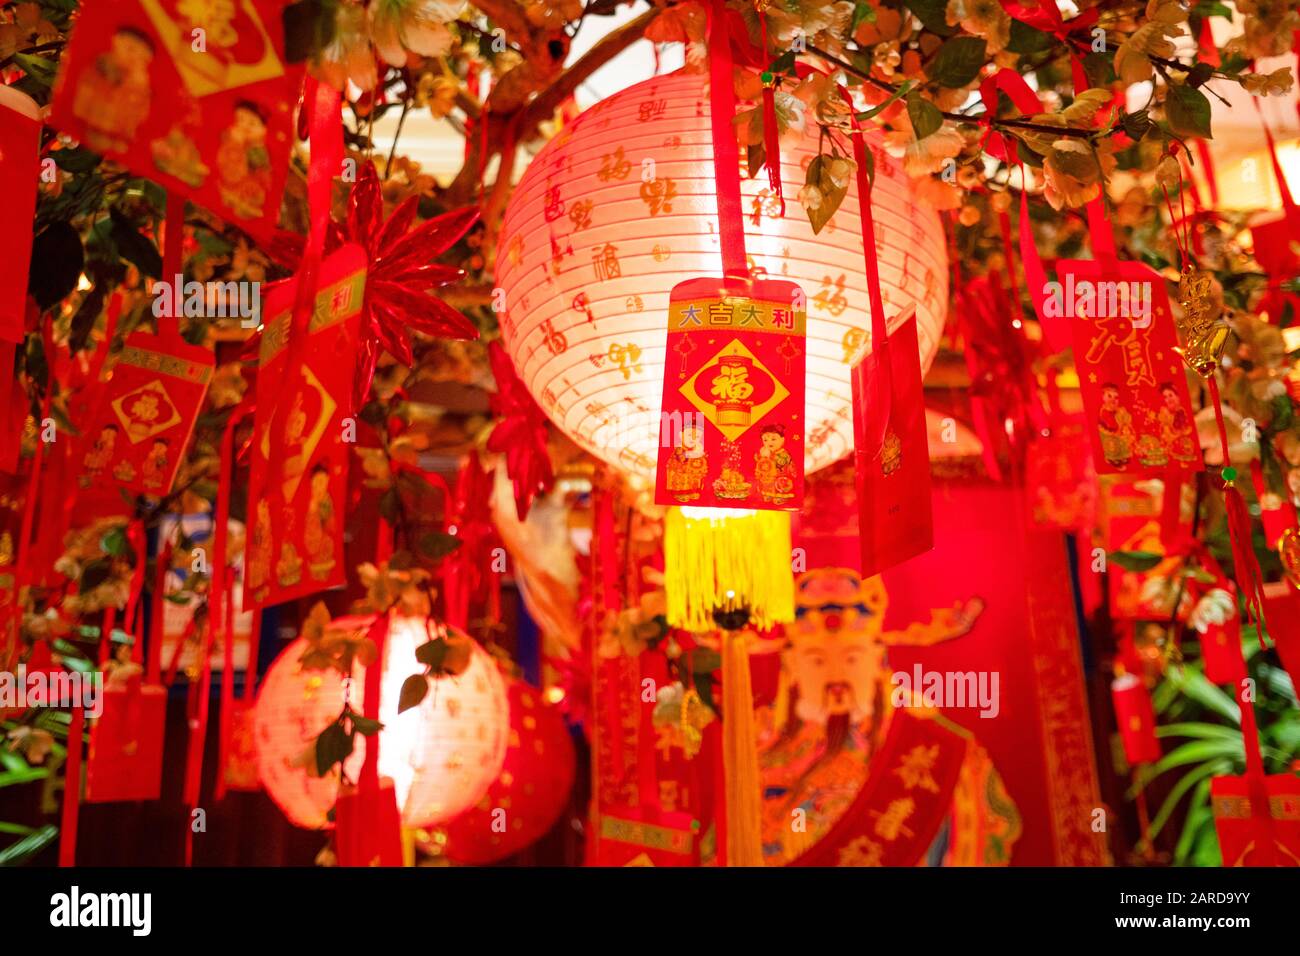 Hanging Chinese decorations during the 2020 Chinese New Year, Stock Photo